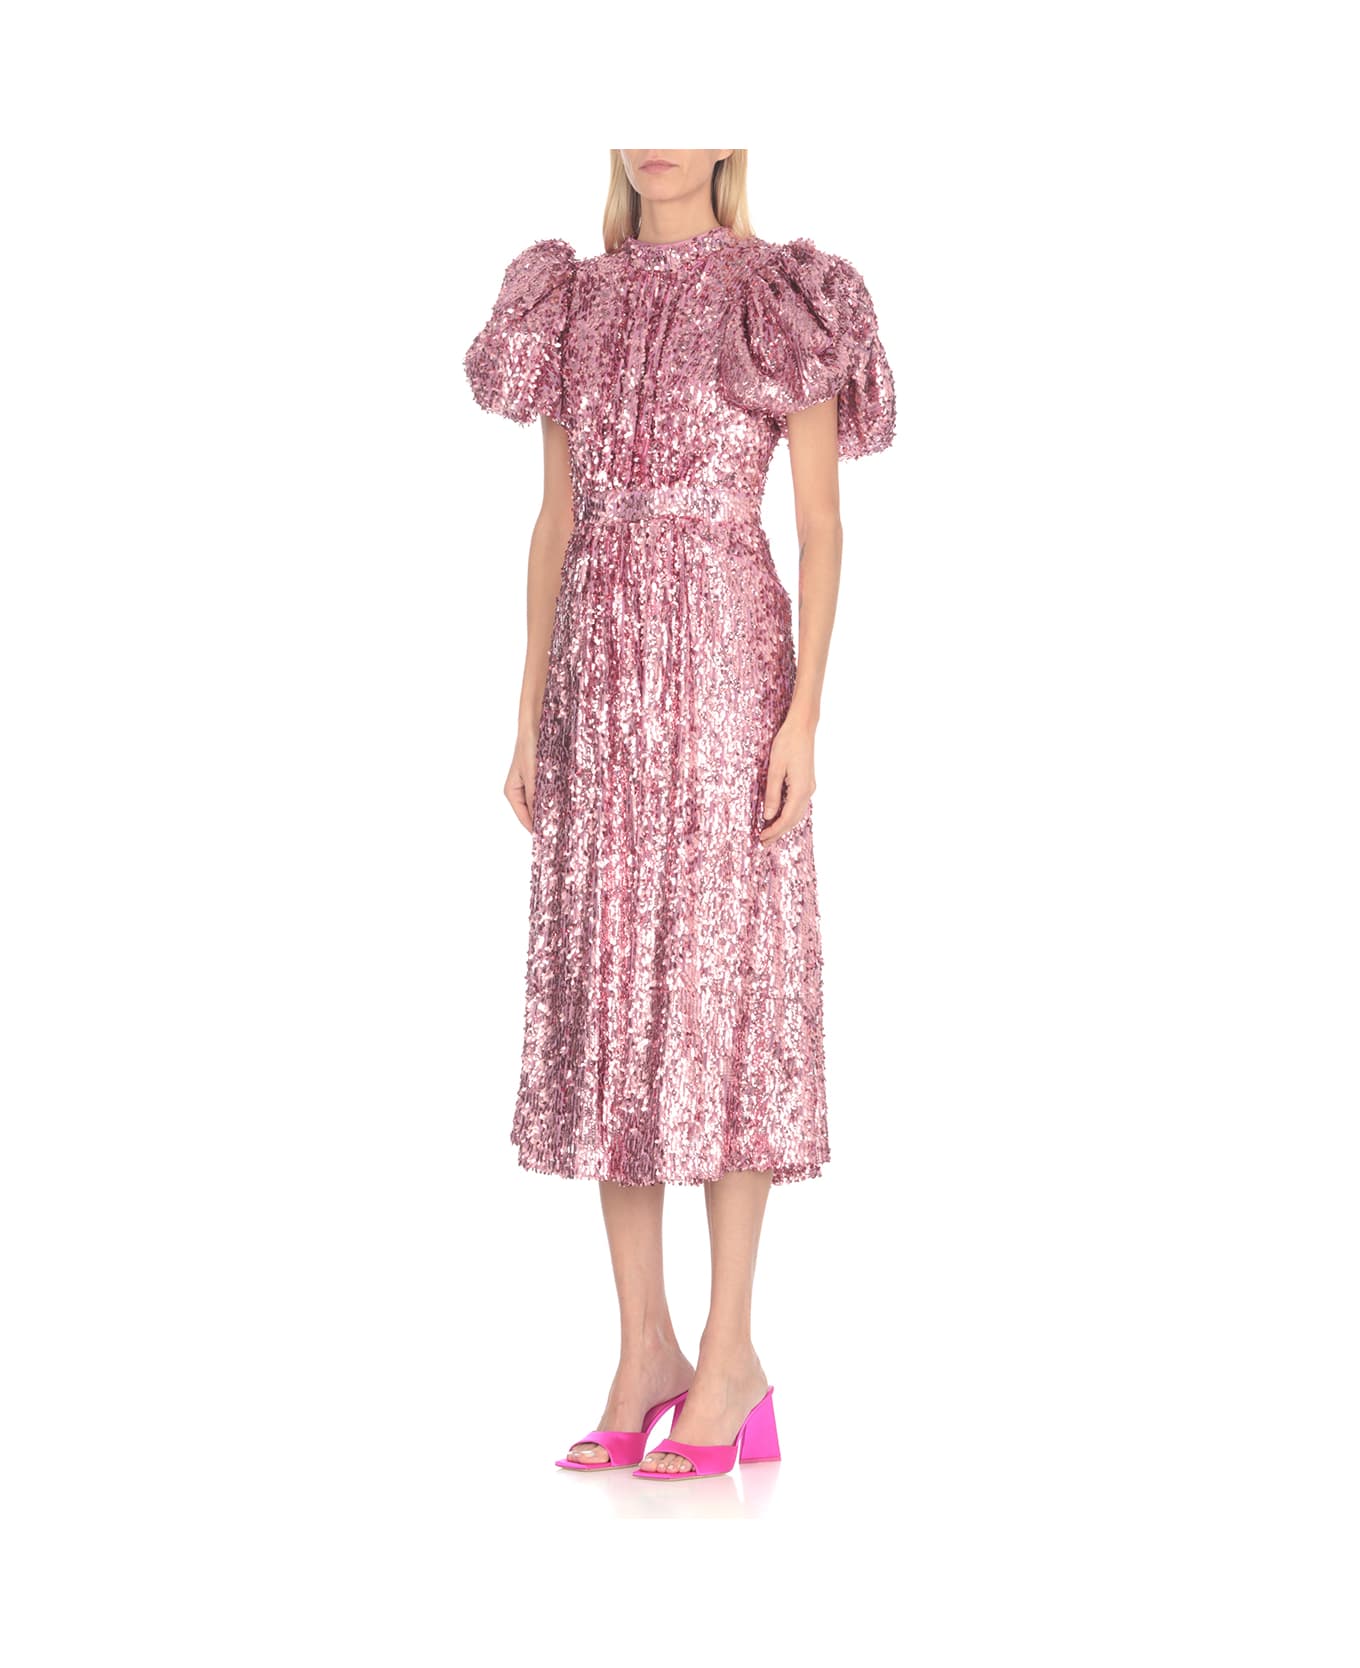 Rotate by Birger Christensen Dress With Paillettes - Pink